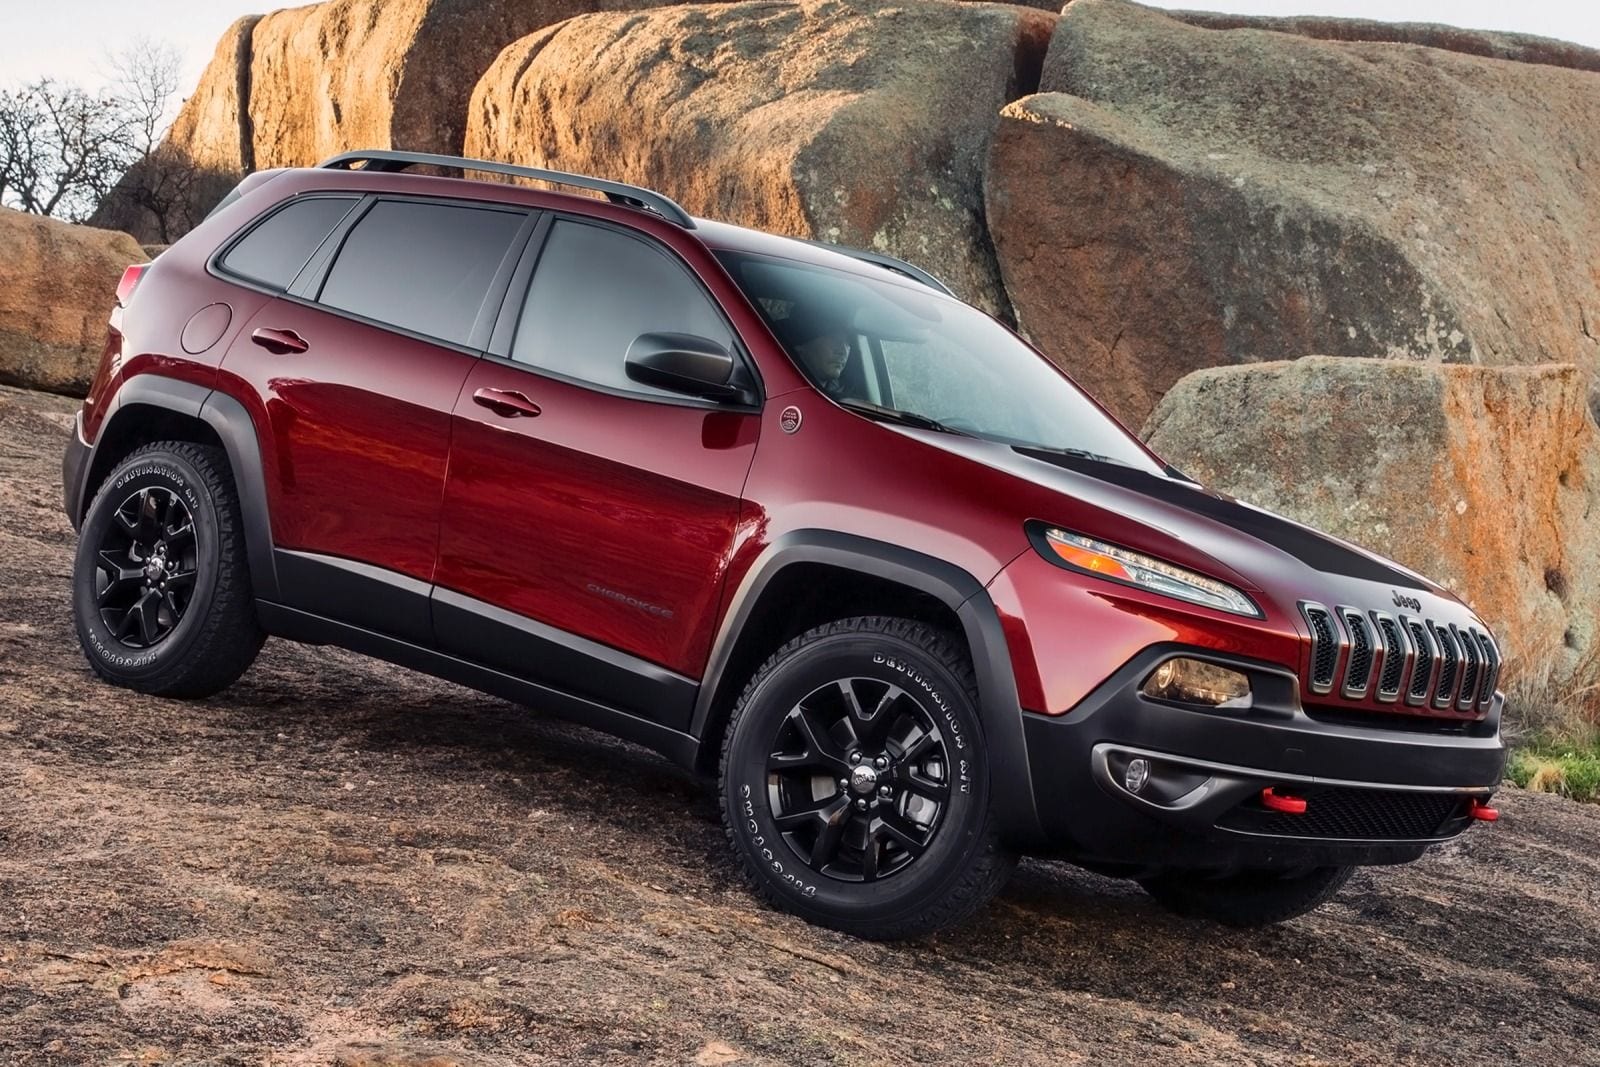 5 Interesting Facts About the New Jeep Cherokee - Auto Influence